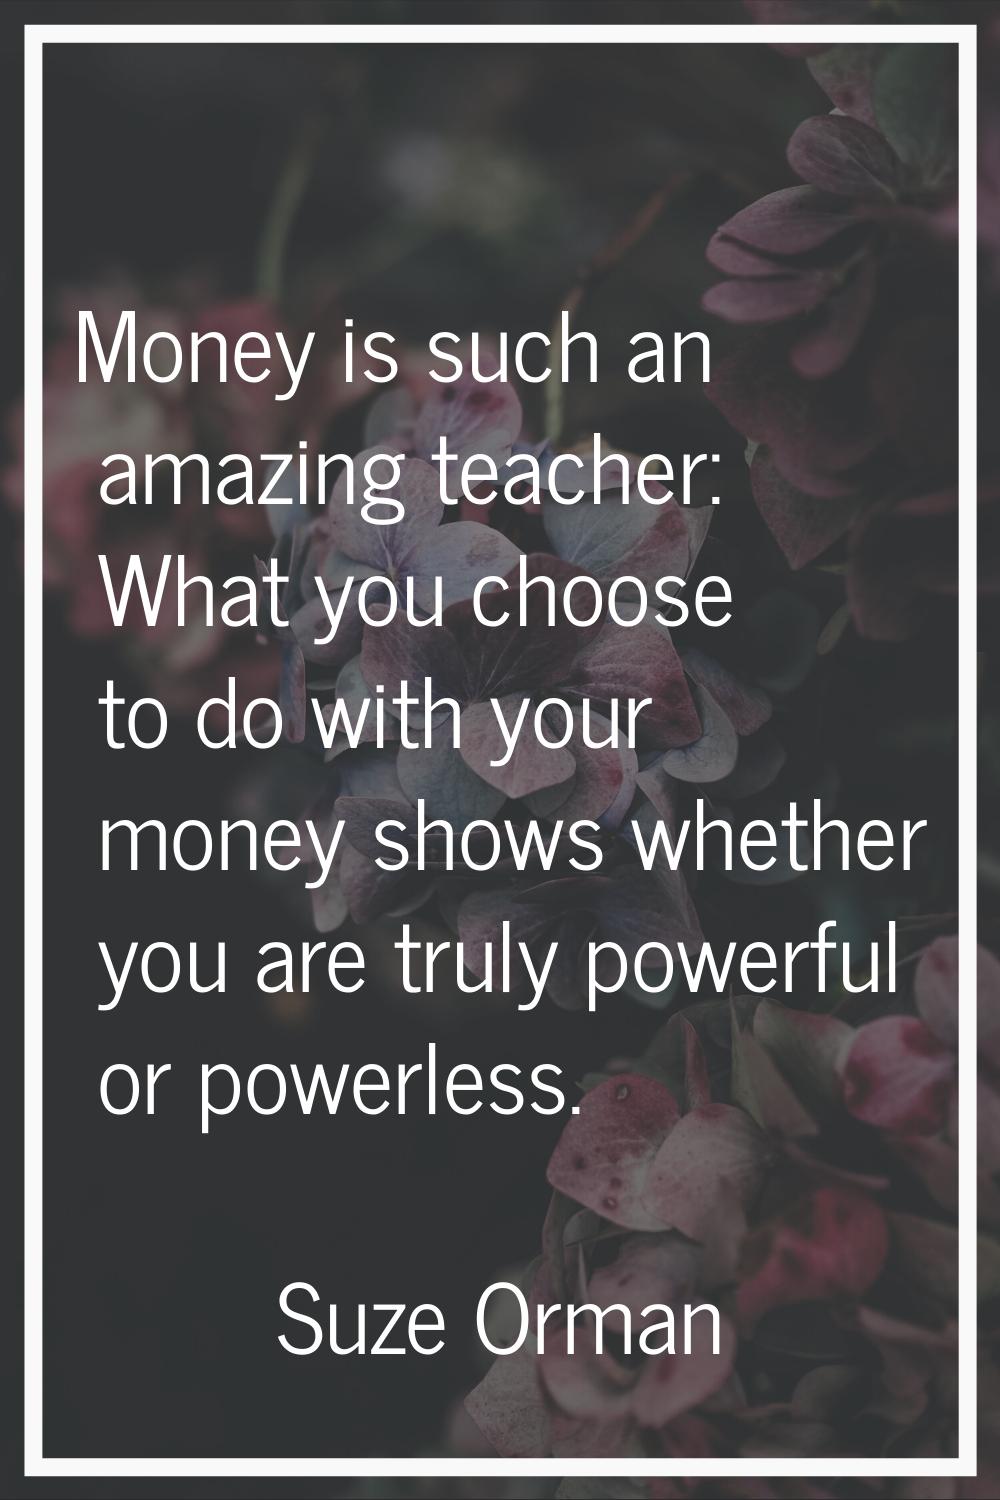 Money is such an amazing teacher: What you choose to do with your money shows whether you are truly